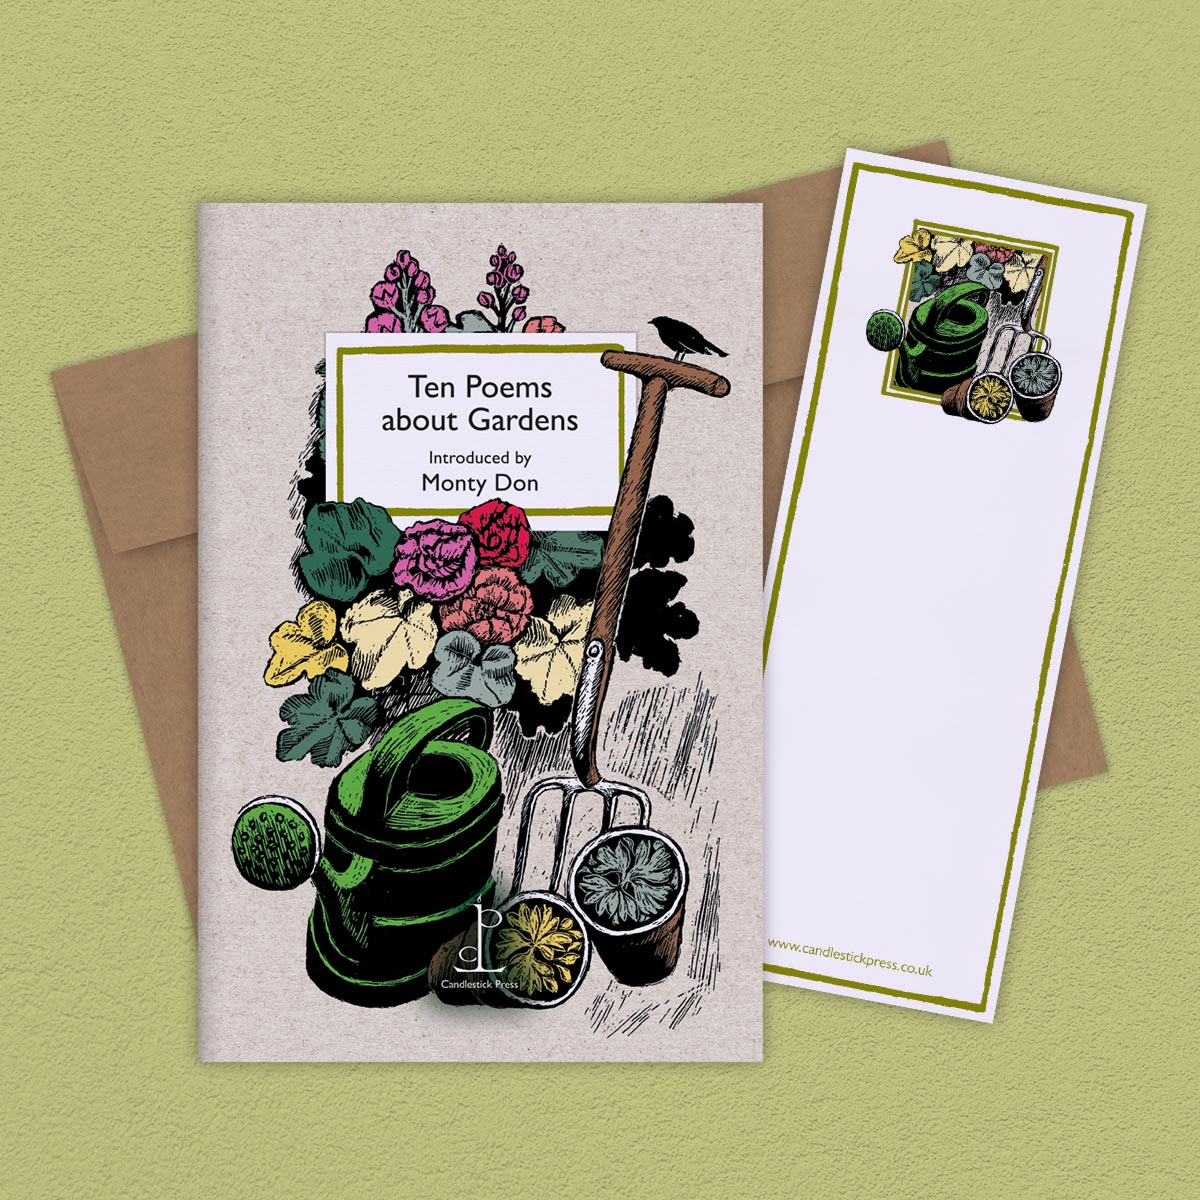 The Poem Pamphlet, 'Ten Poems about Gardens' sits on a light green background with the bookmark and brown envelope.